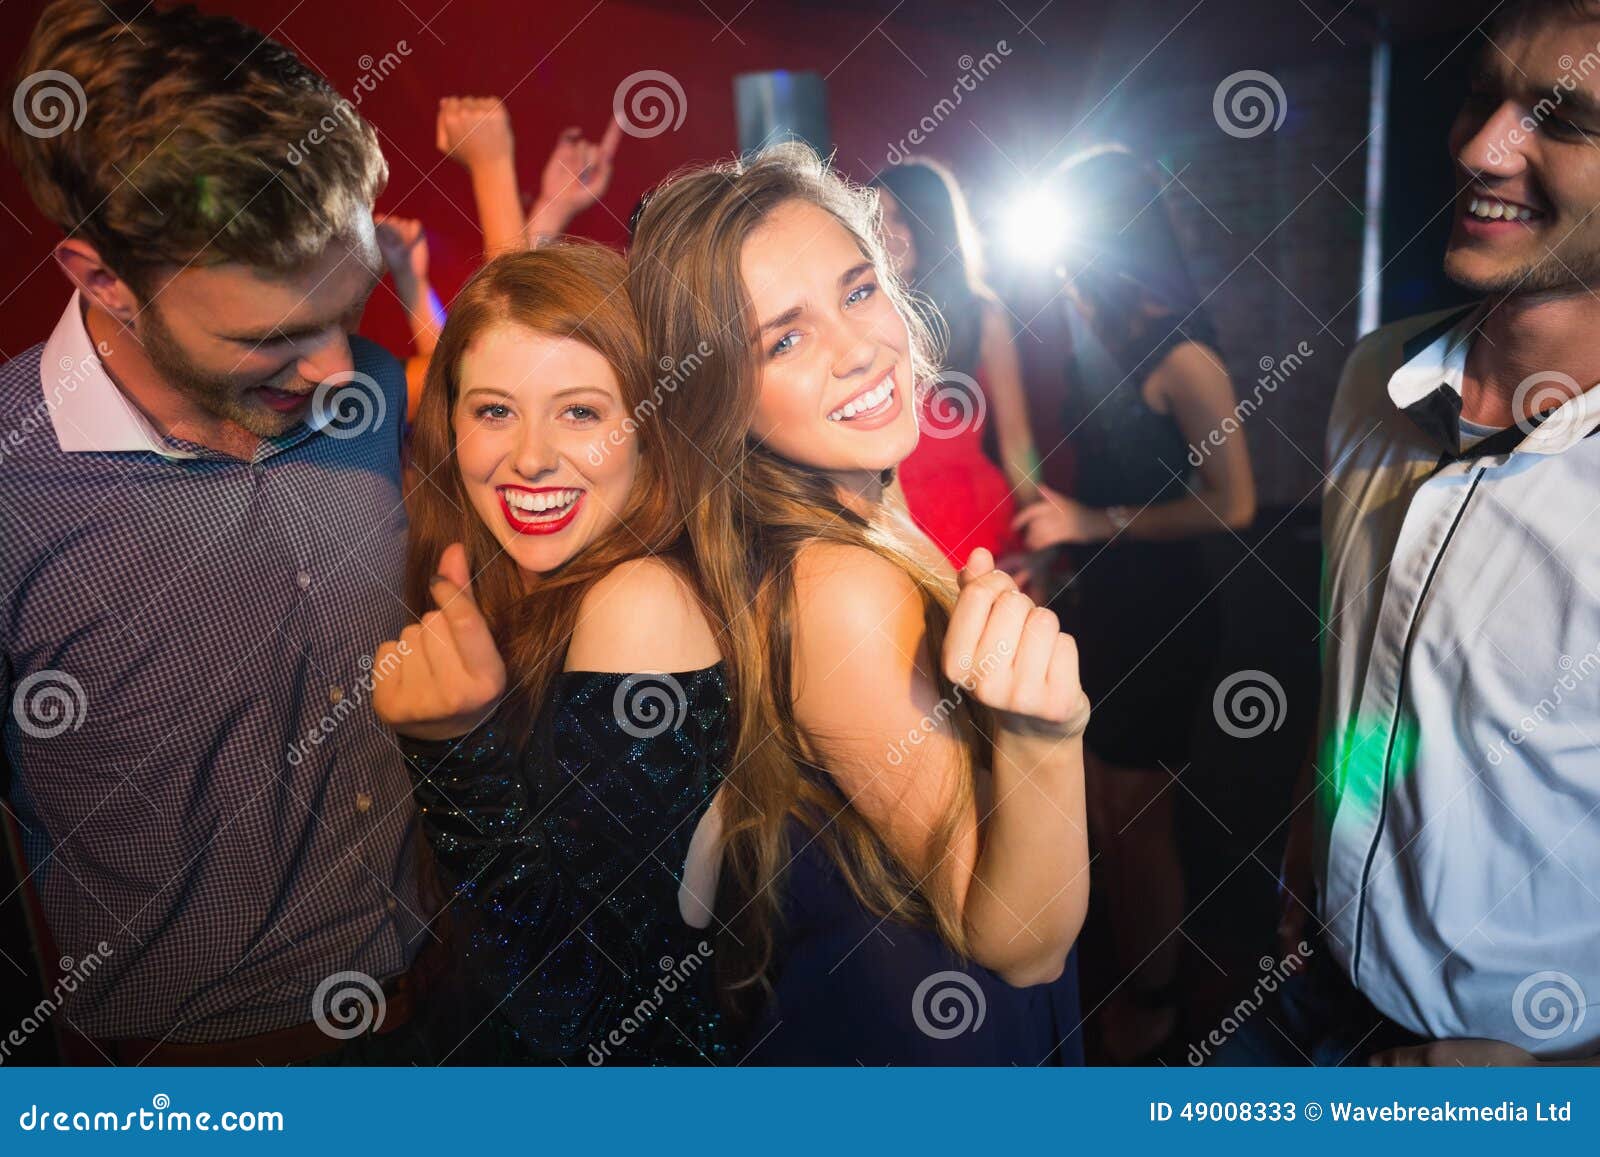 Happy Friends Having Fun Together Stock Image - Image of nightlife ...